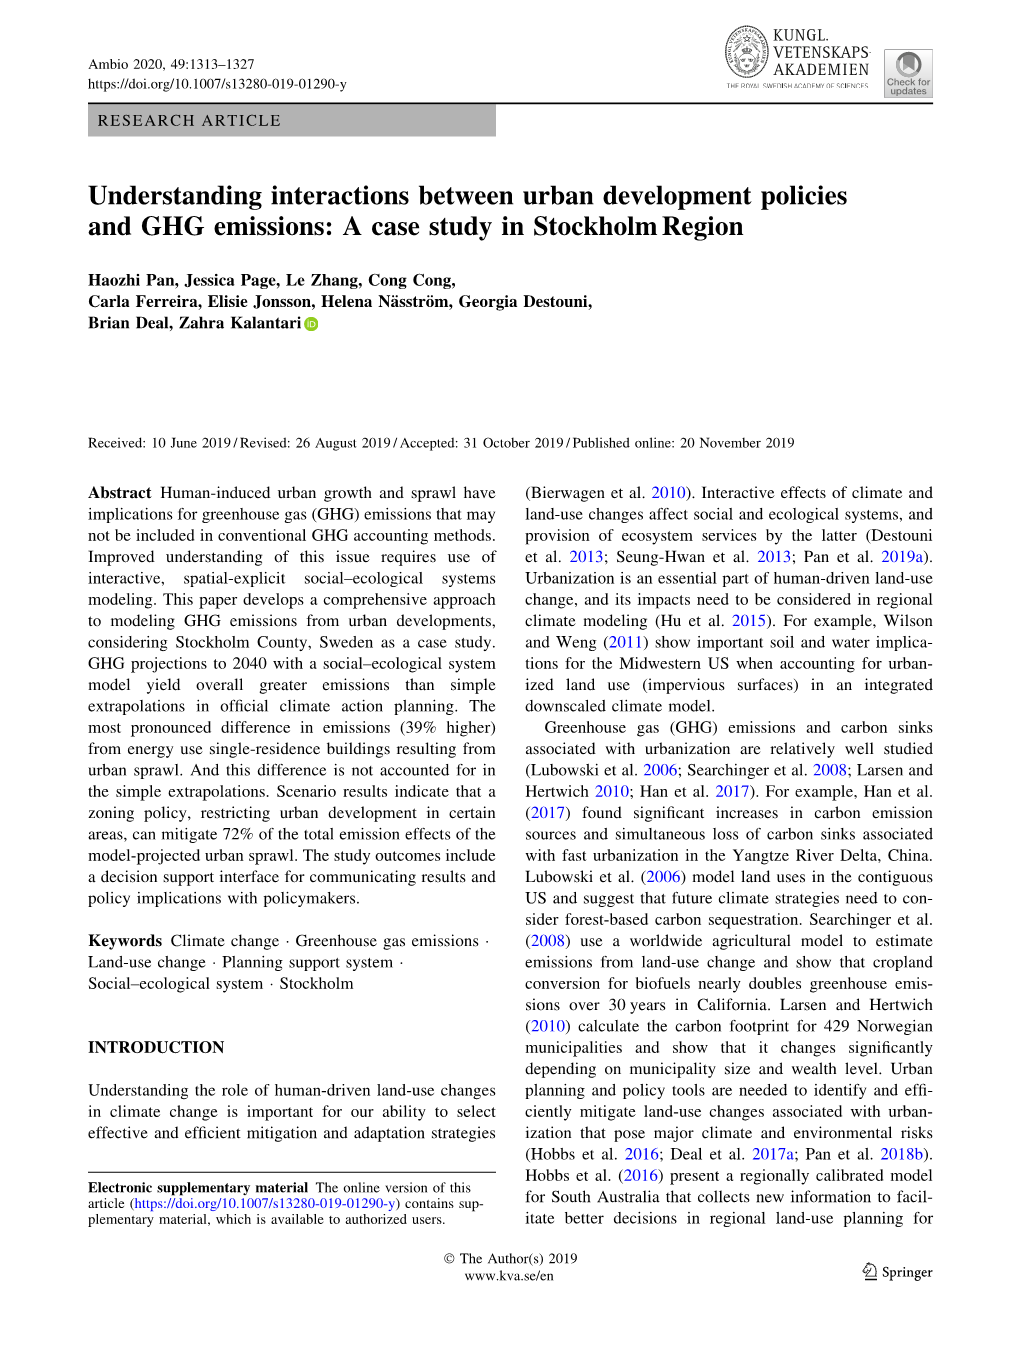 Understanding Interactions Between Urban Development Policies and GHG Emissions: a Case Study in Stockholm Region